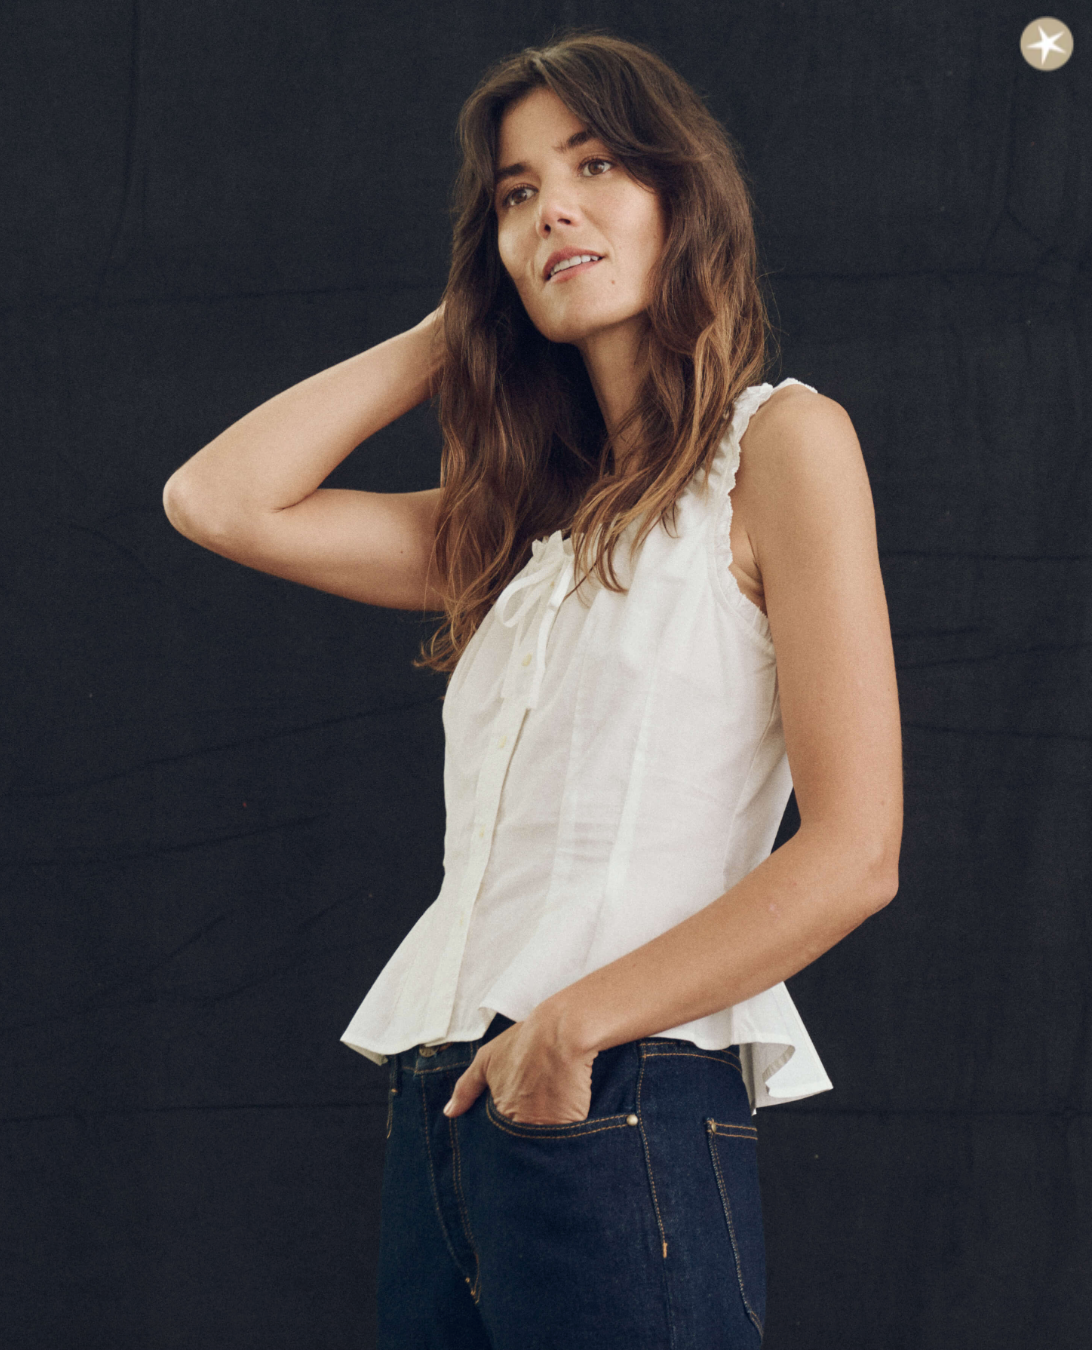 A woman in The Abbey Top from The Great Inc. poses against a black background, with her hand resting on his neck and a thoughtful expression, reminiscent of the relaxed lifestyle in Scottsdale, Arizona.